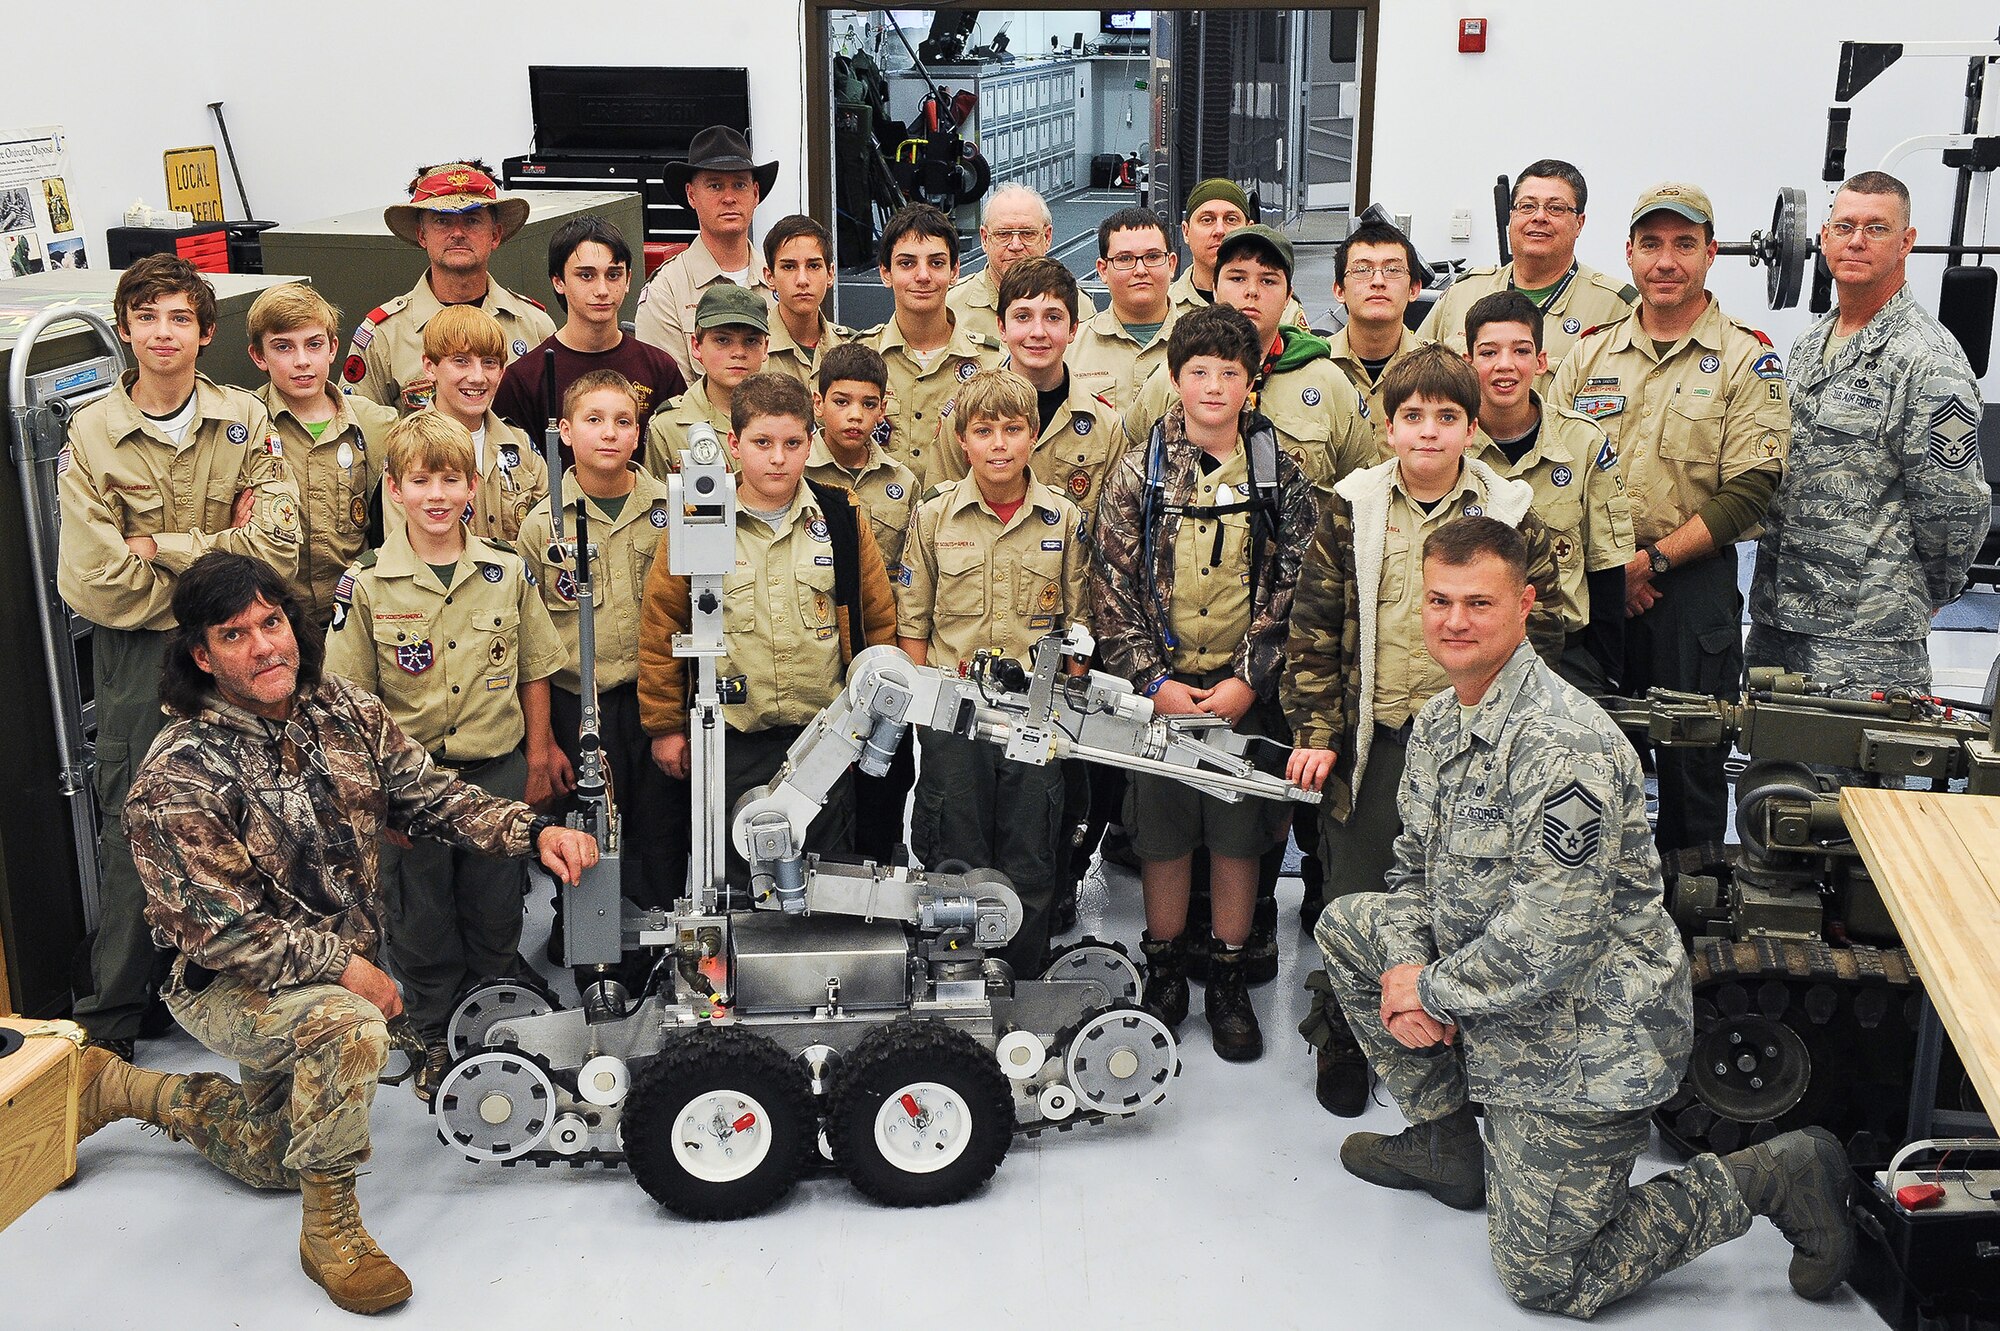 Boy Scouts from Troop 51 out of Forsyth, Ga., pose for a group picture during a visit to the 116th Civil Engineering Squadron (CES) explosive ordnance (EOD) shop, Robins Air Force Base, Ga., Jan. 22, 2012.  The scouts were given a tour of the EOD unit during a field trip to Robins Air Force Base.  During the tour, Air National Guardsmen Senior Master Sgt. John Bell, kneeling, and Chief Master Sgt. David Fite, 116th CES, demonstrated equipment and techniques used by the EOD unit. (National Guard photo by Master Sgt. Roger Parsons/Released)